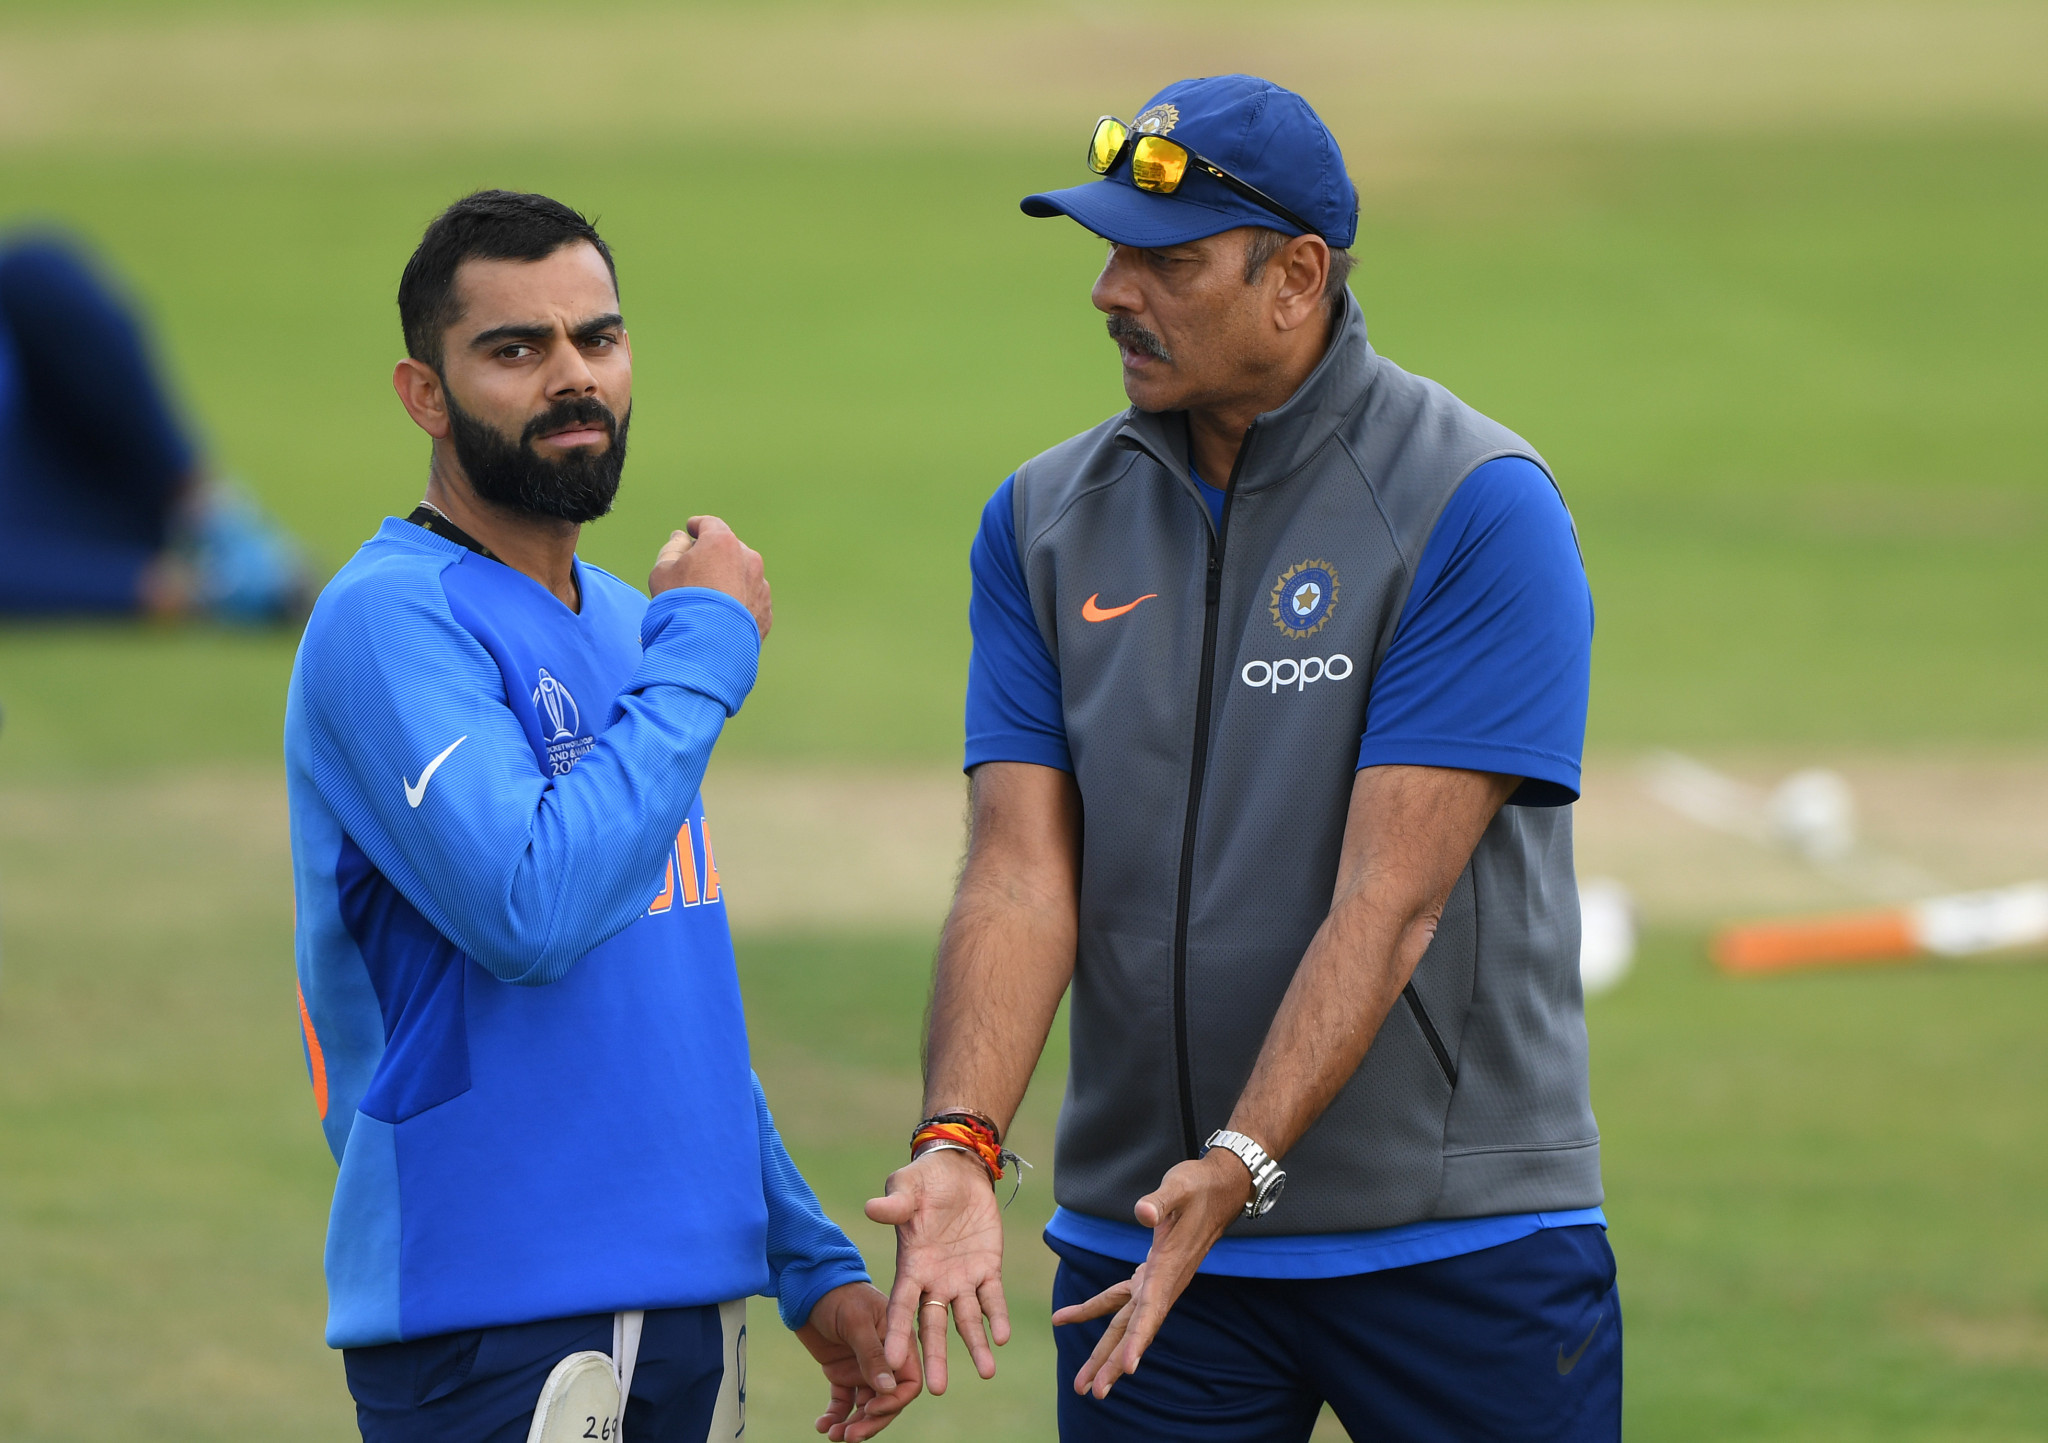 India coach Shastri says global tournaments should not be cricket's priority